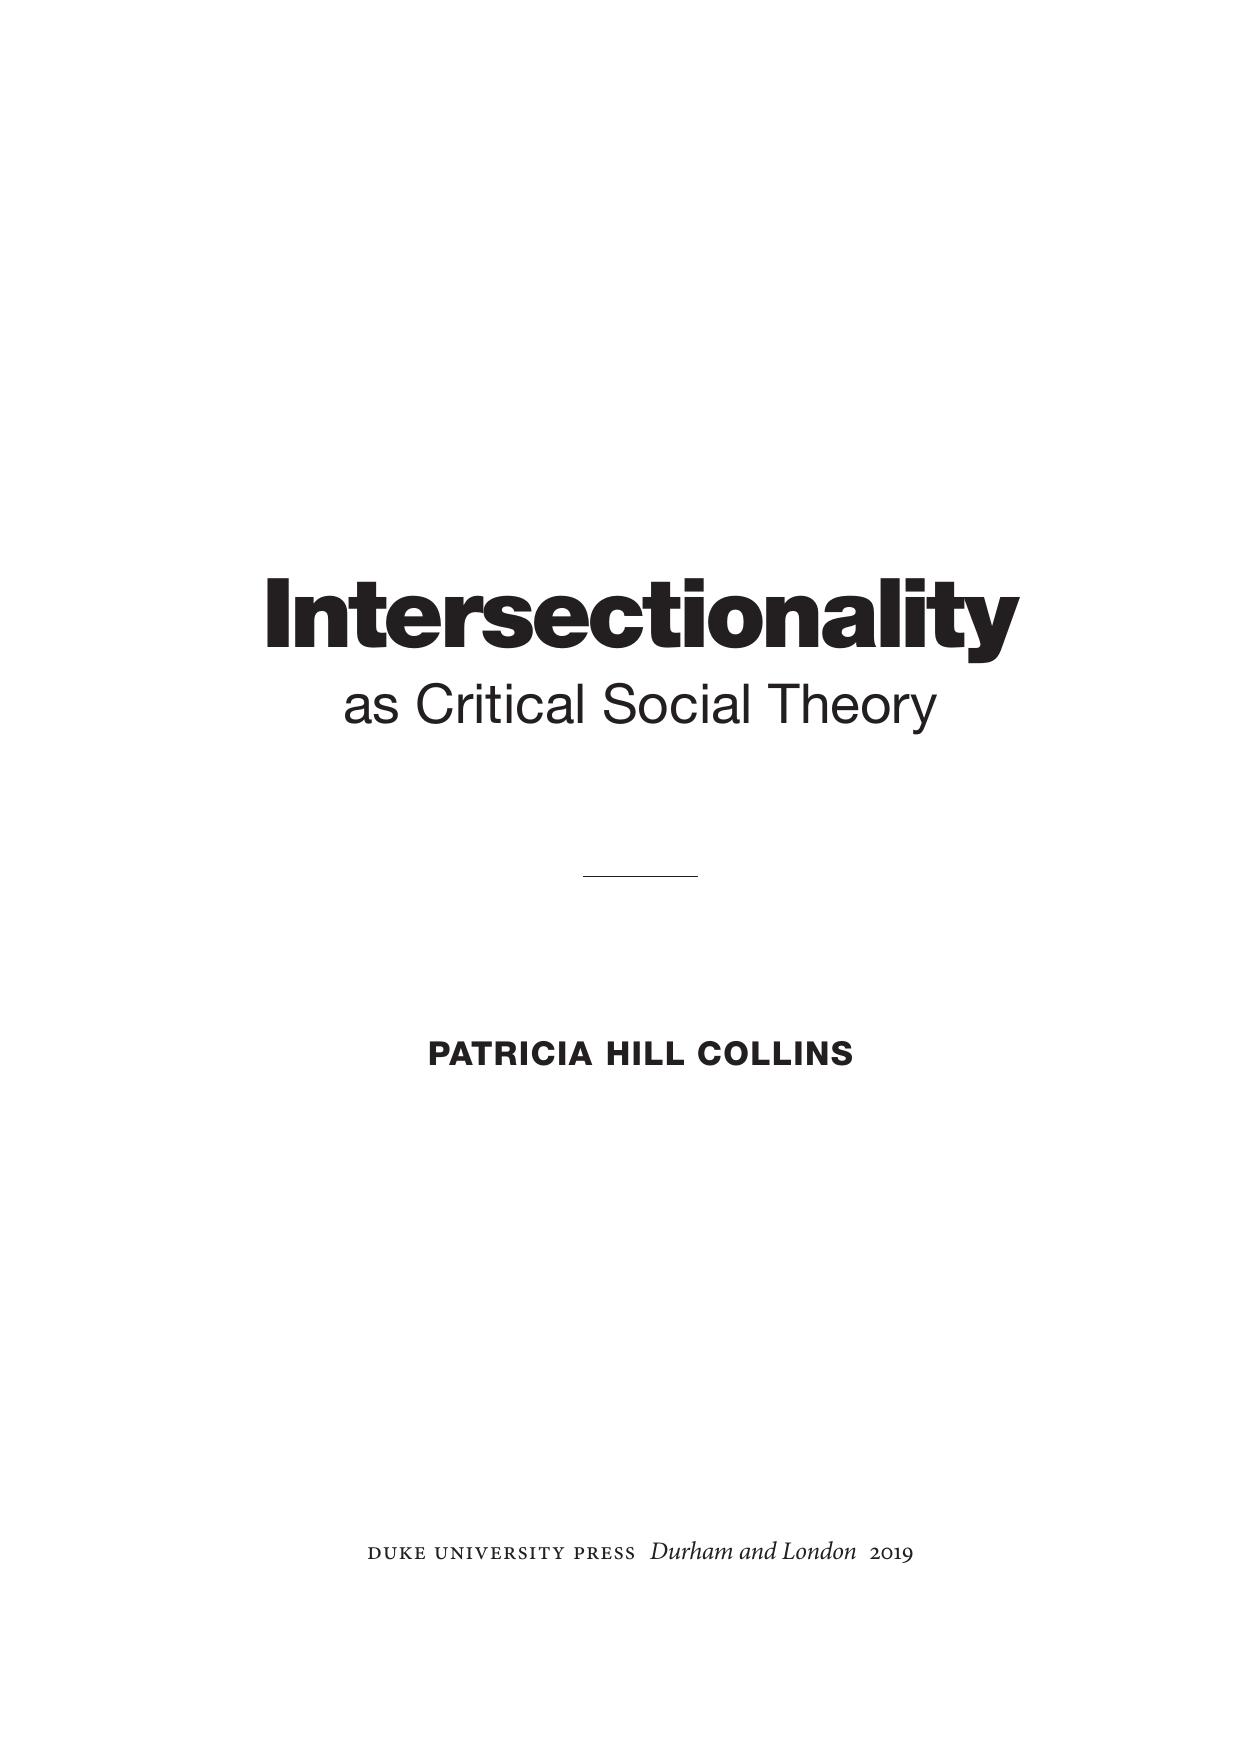 Intersectionality as Critical Social Theory by Patricia Hill Collins